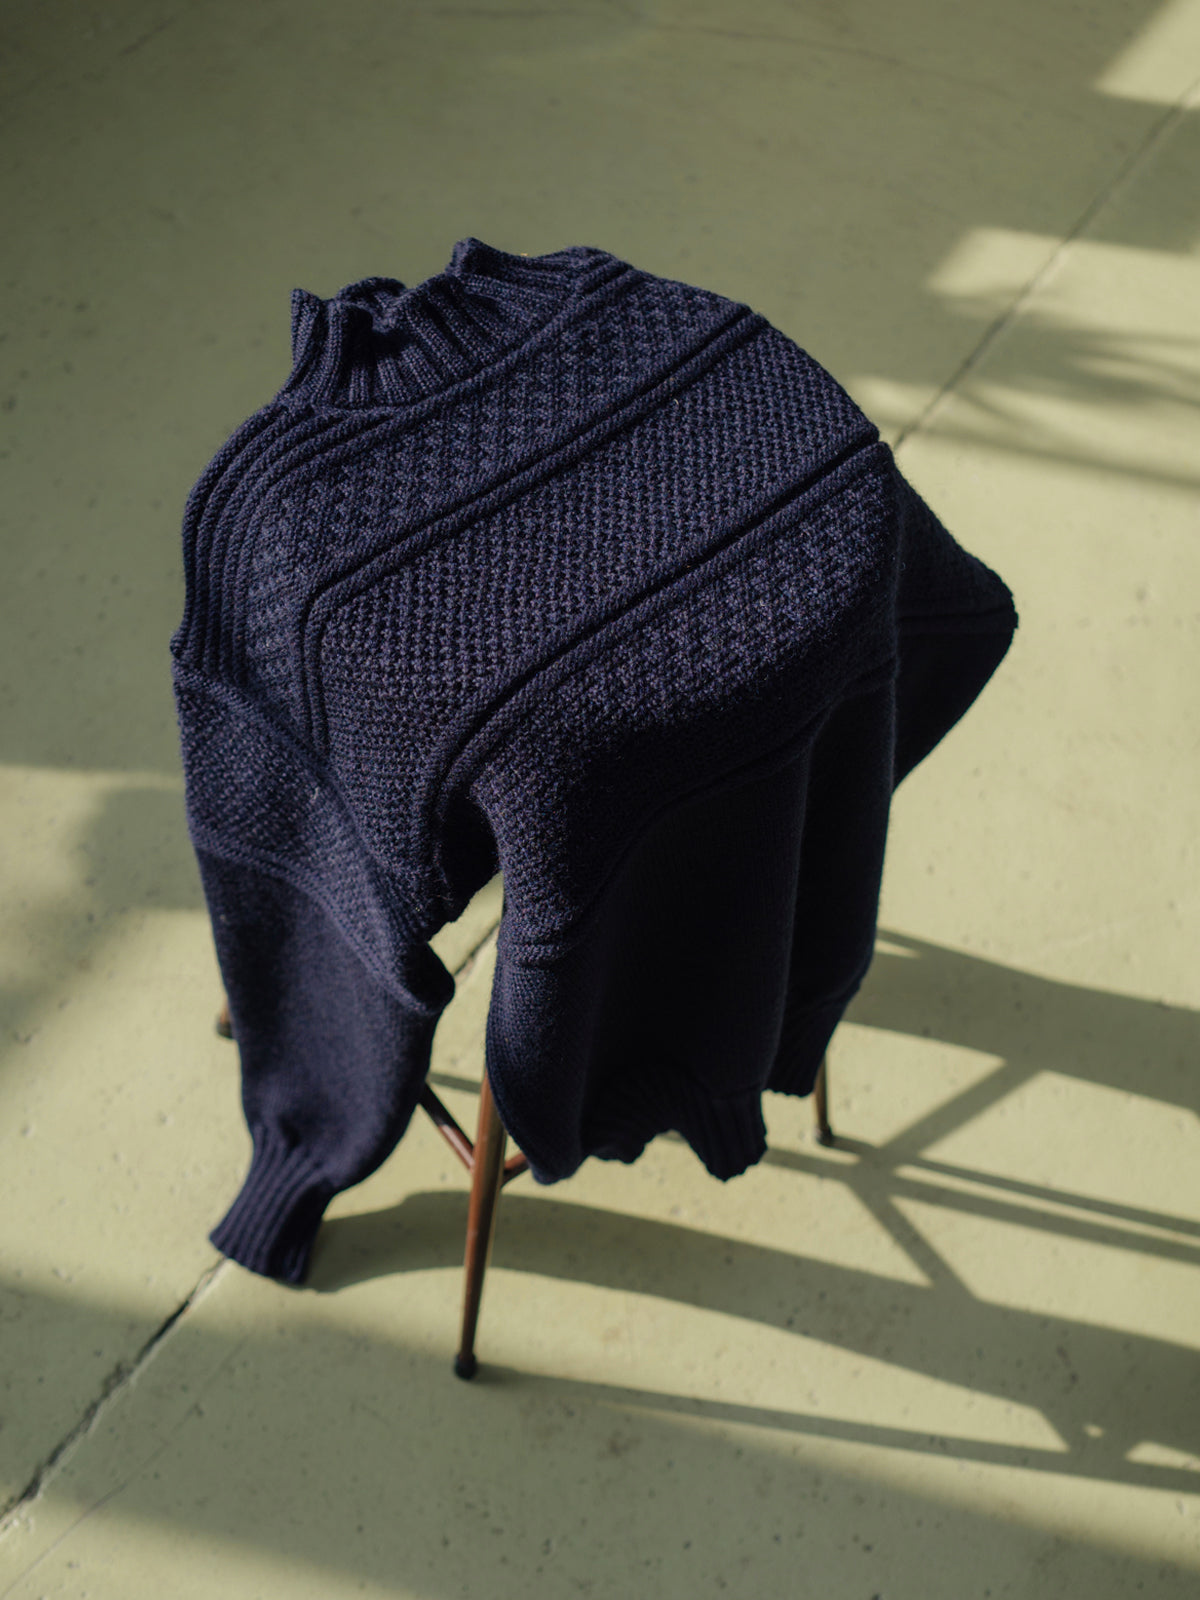 A navy blue merino wool sweater, draped over a wooden stool.